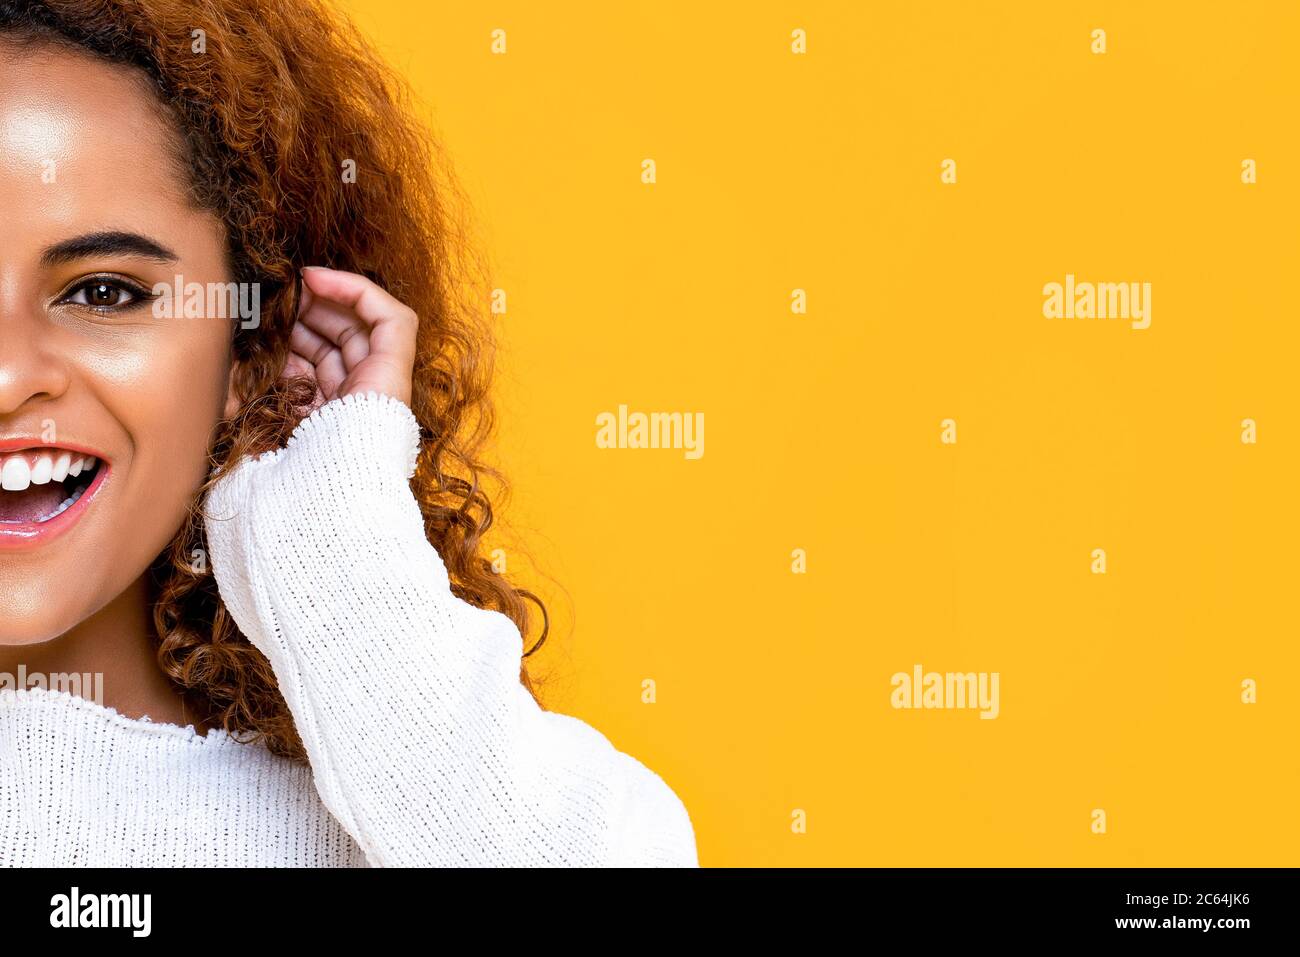 Half face close up portrait of young African American woman smiling while touching her ear in isolated yellow background with copy space Stock Photo